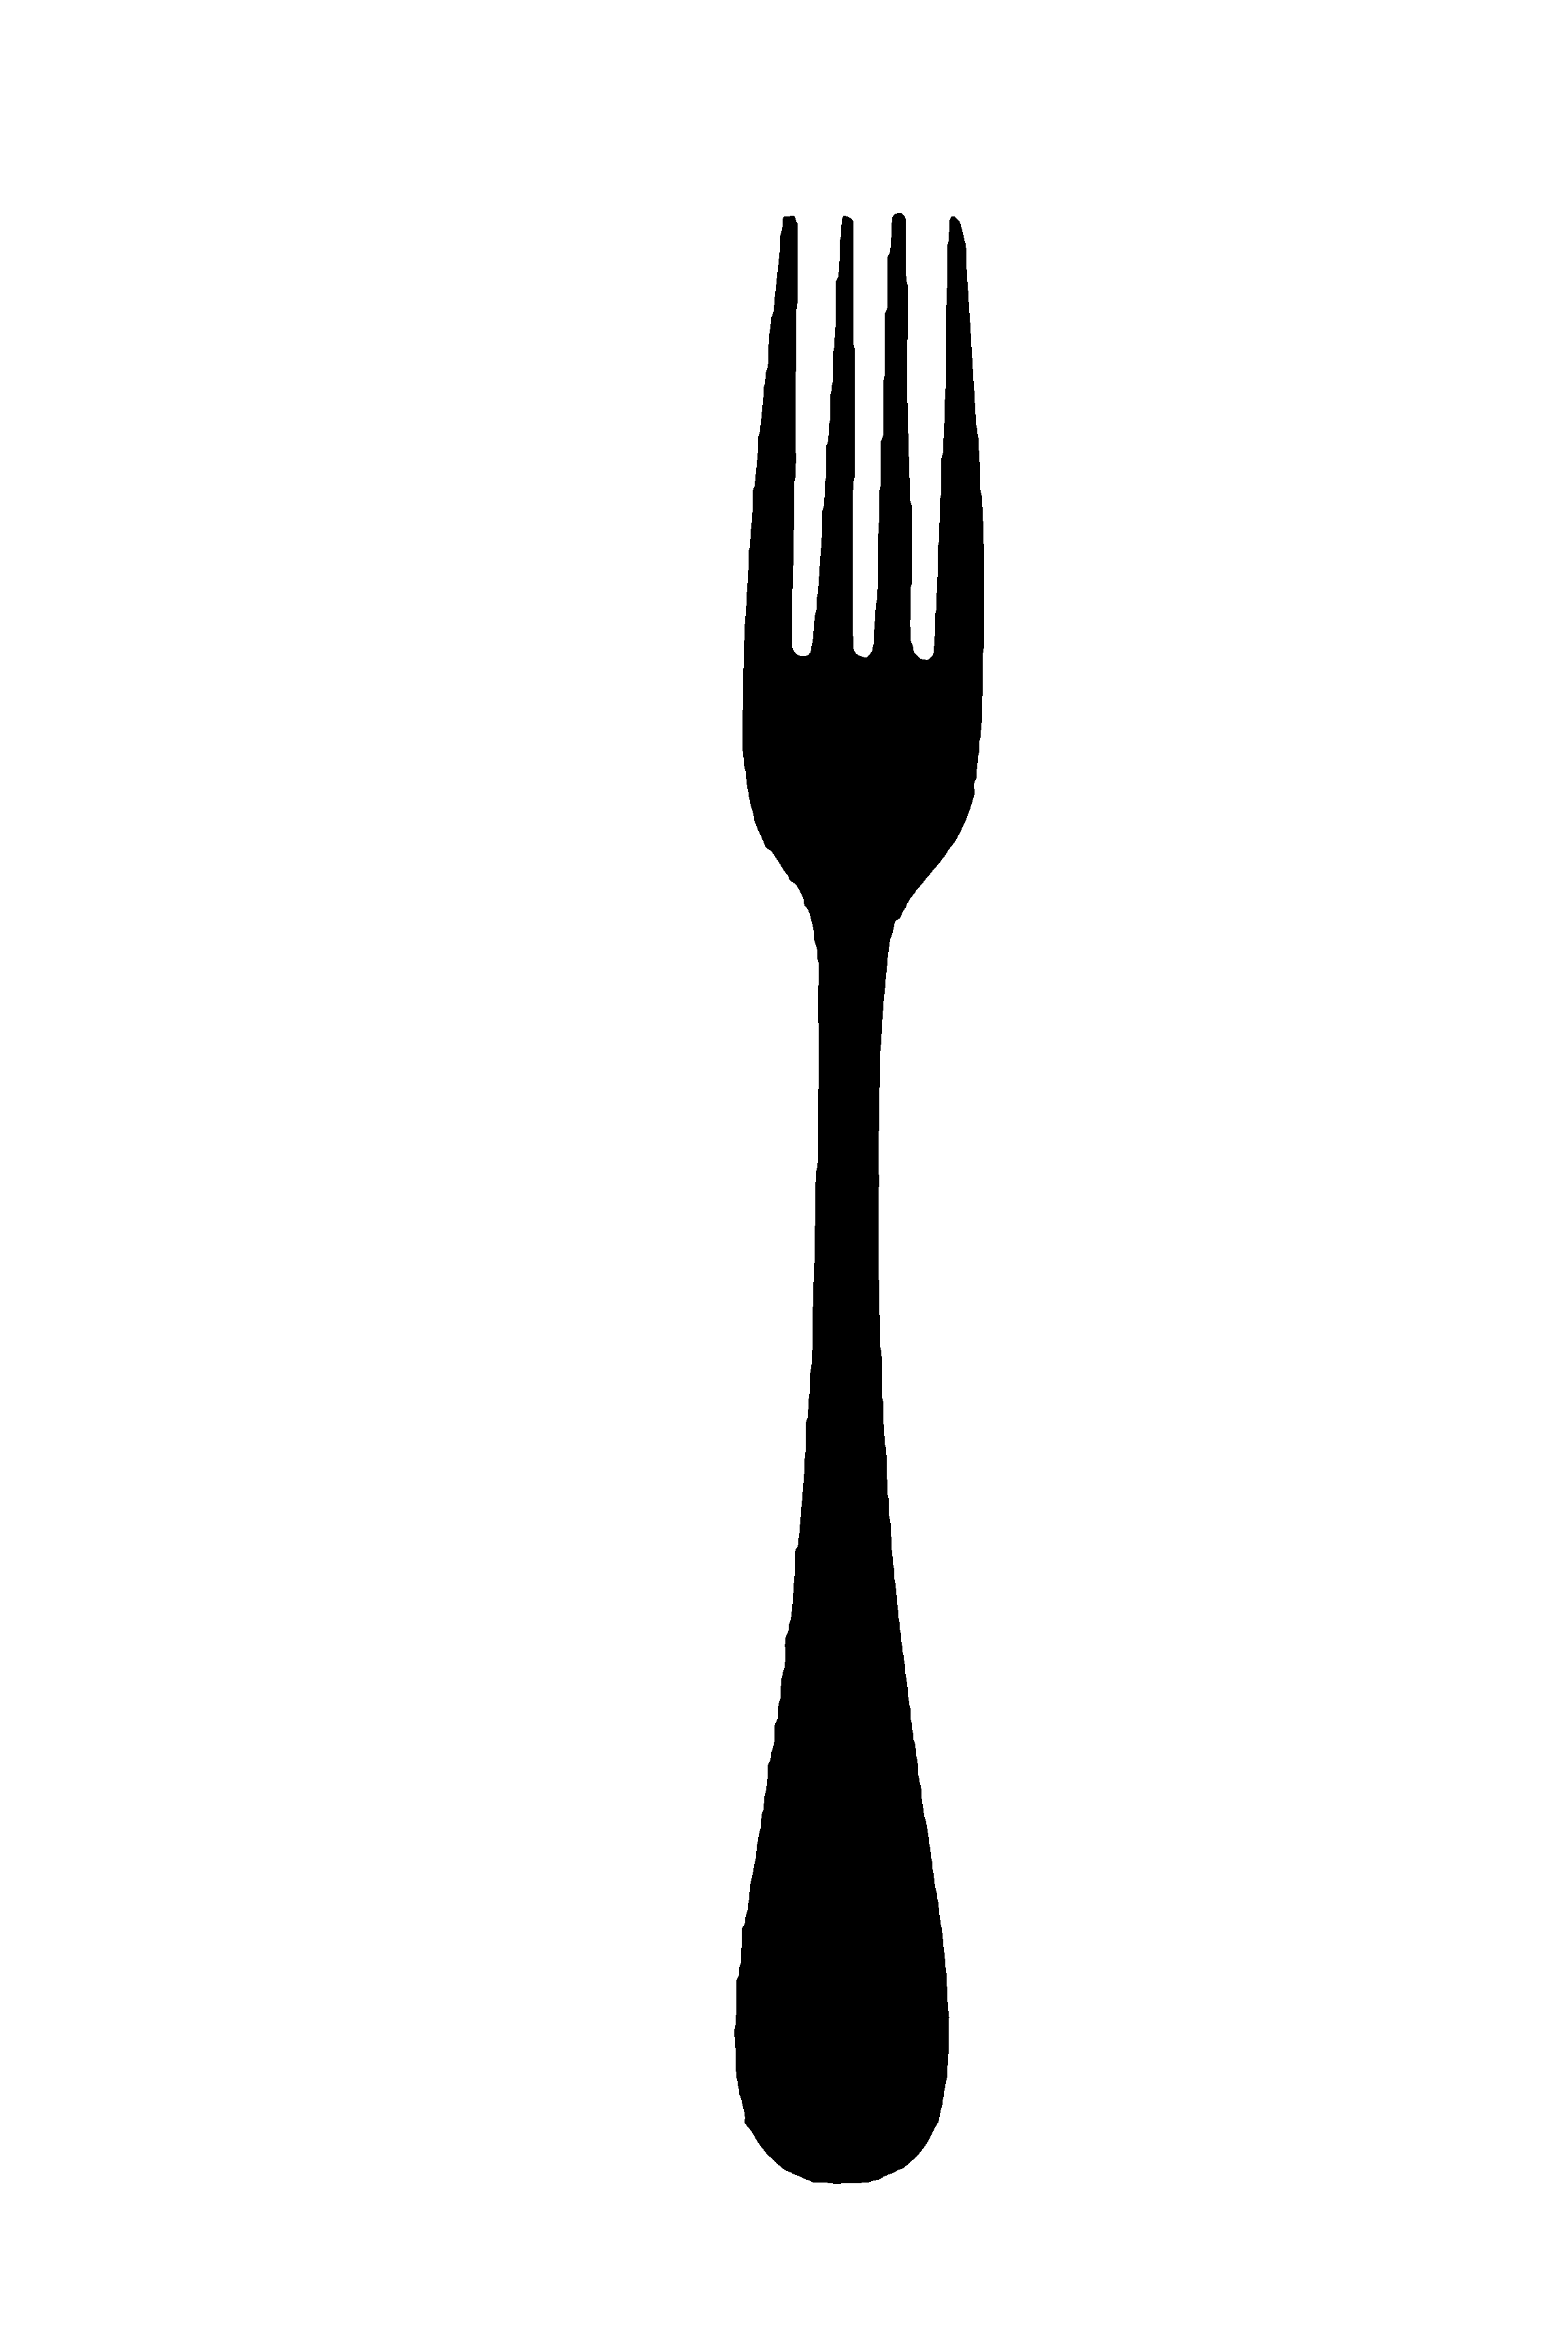 black fork clip art - all the Gallery you need!